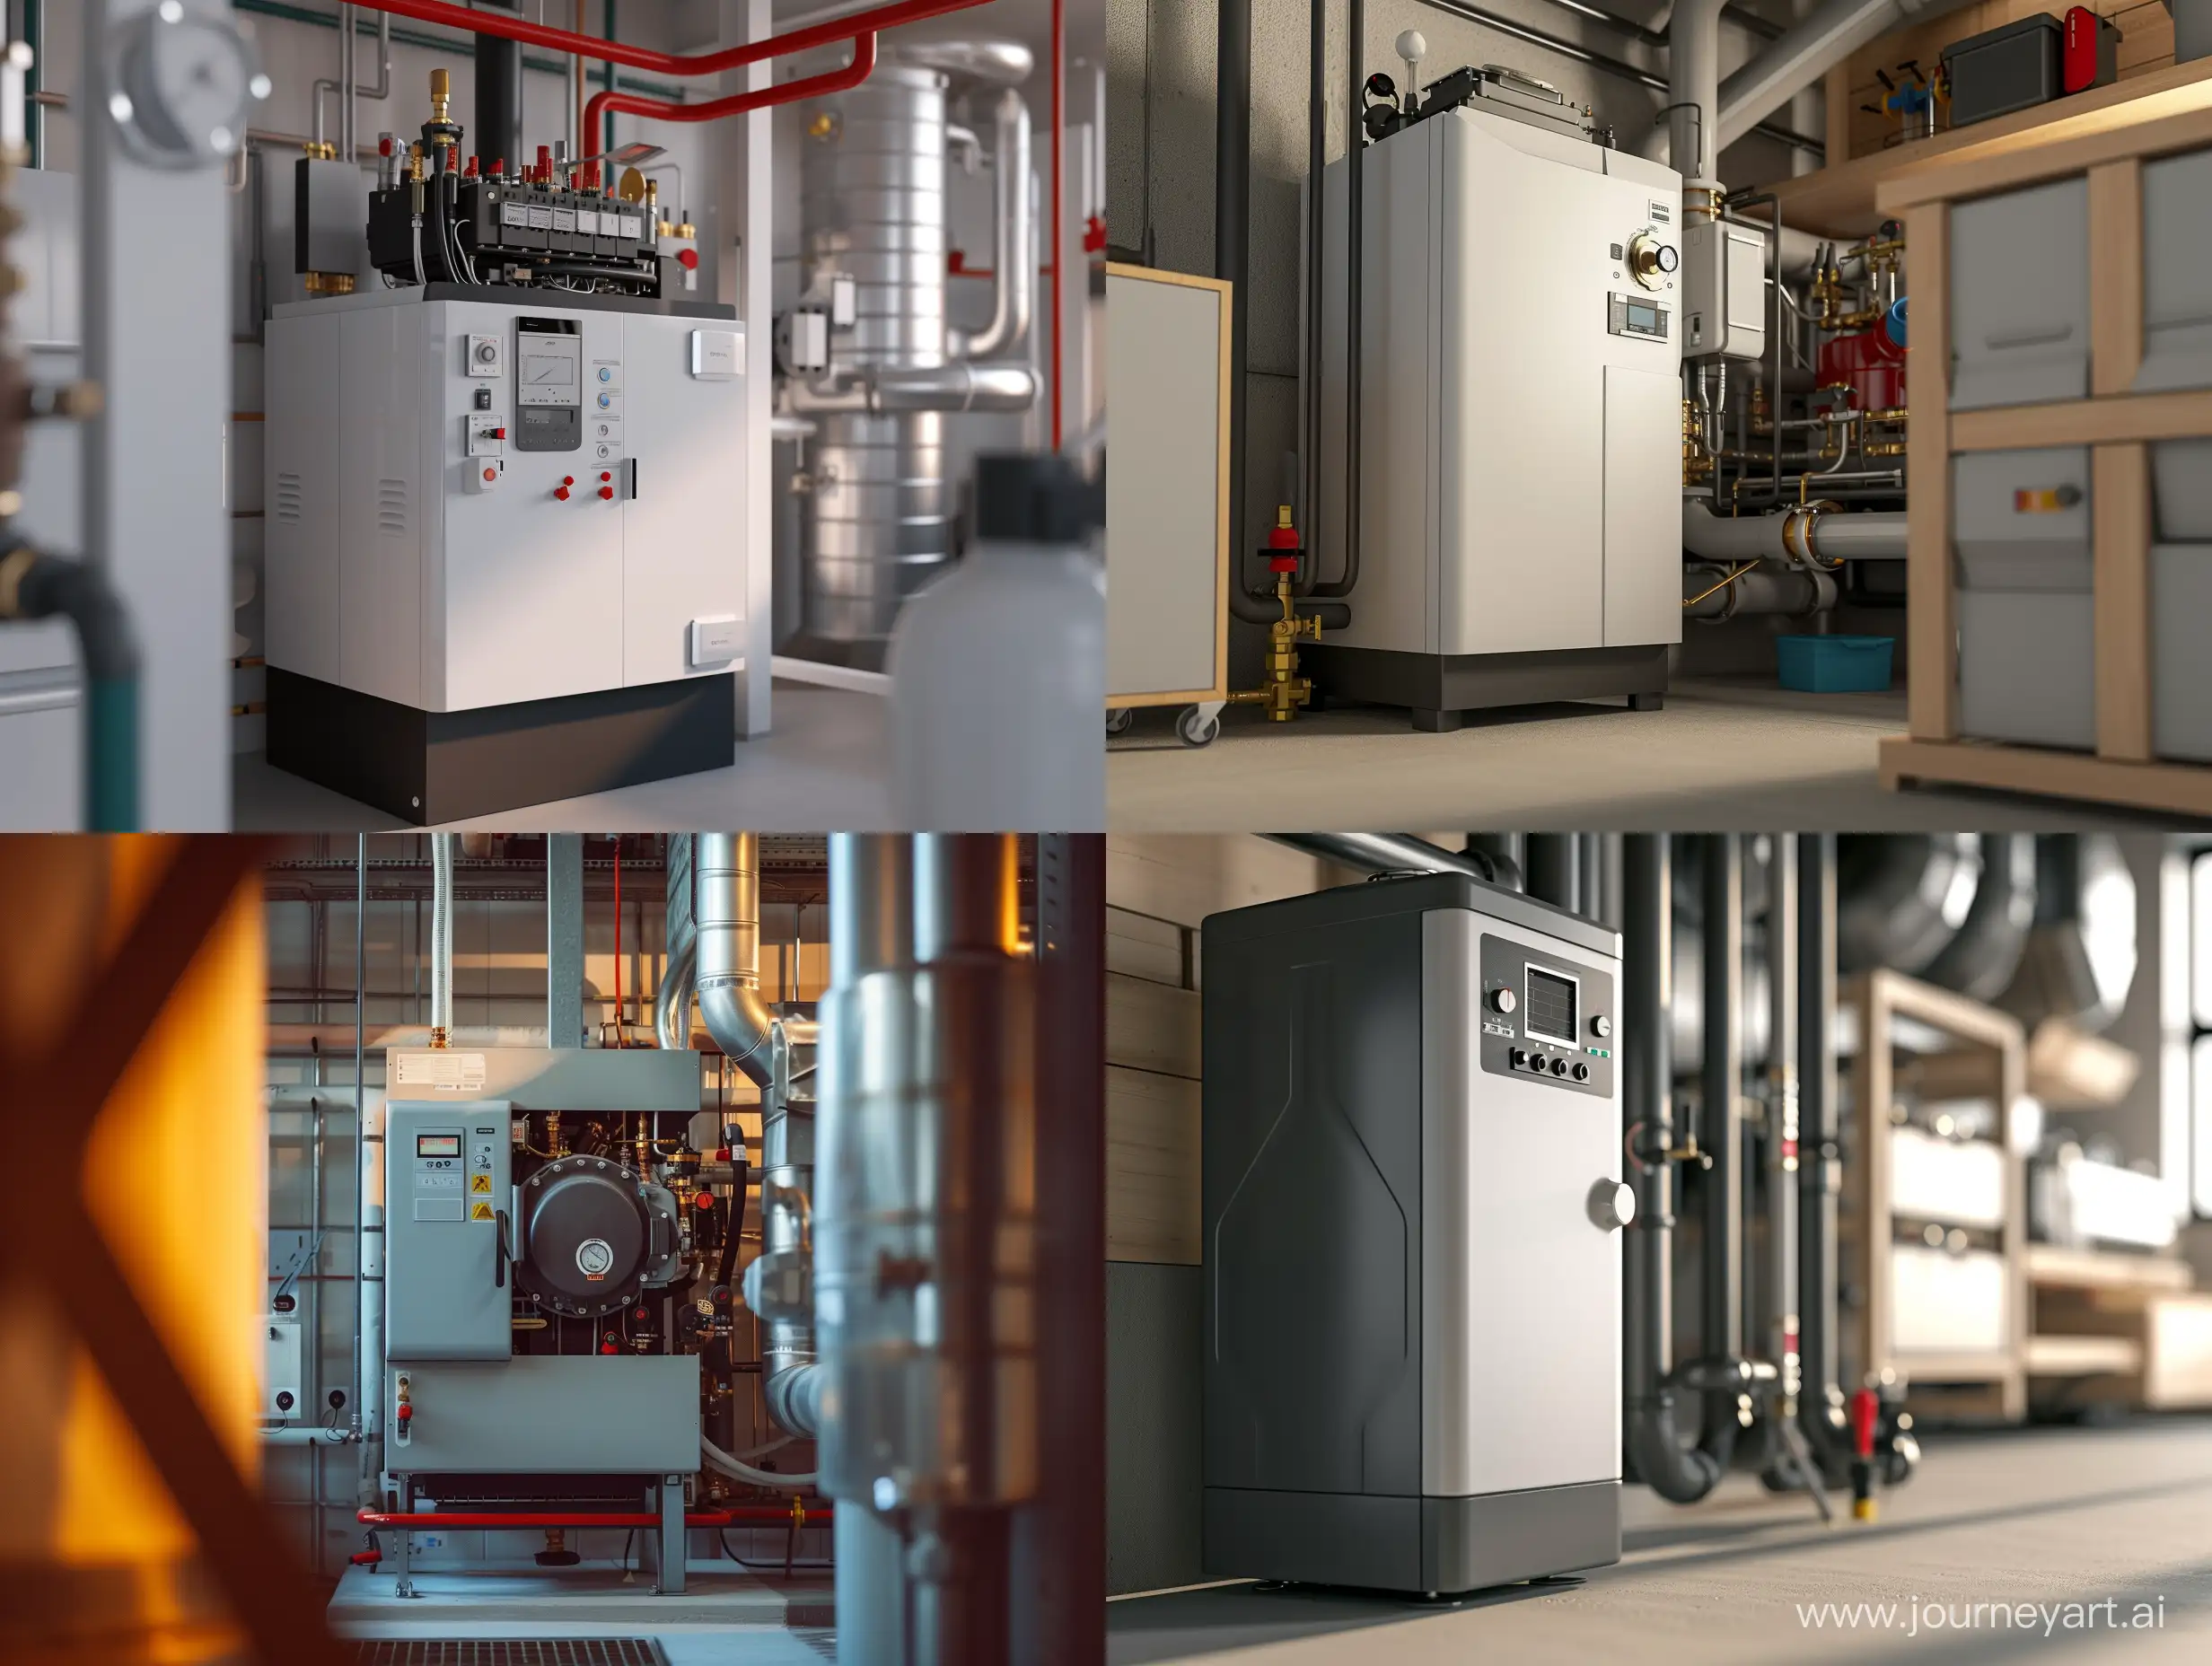 Use an image of a gas boiler, don't change the look of the boiler, complete the image of the boiler room interior around the boiler so it sits there organically